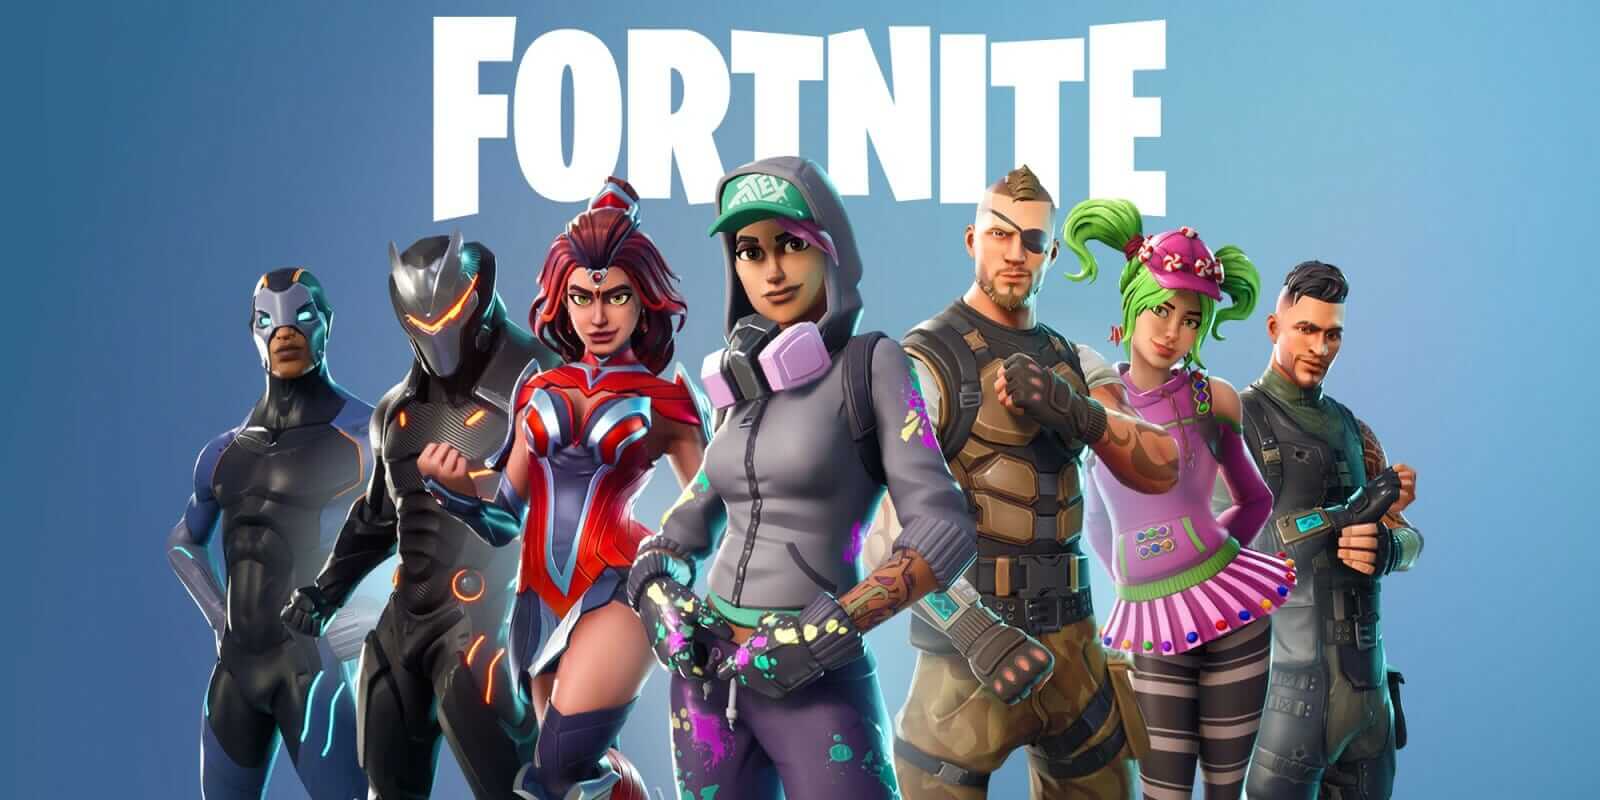 Fortnite on Switch is really unfair and can't be enjoyed.